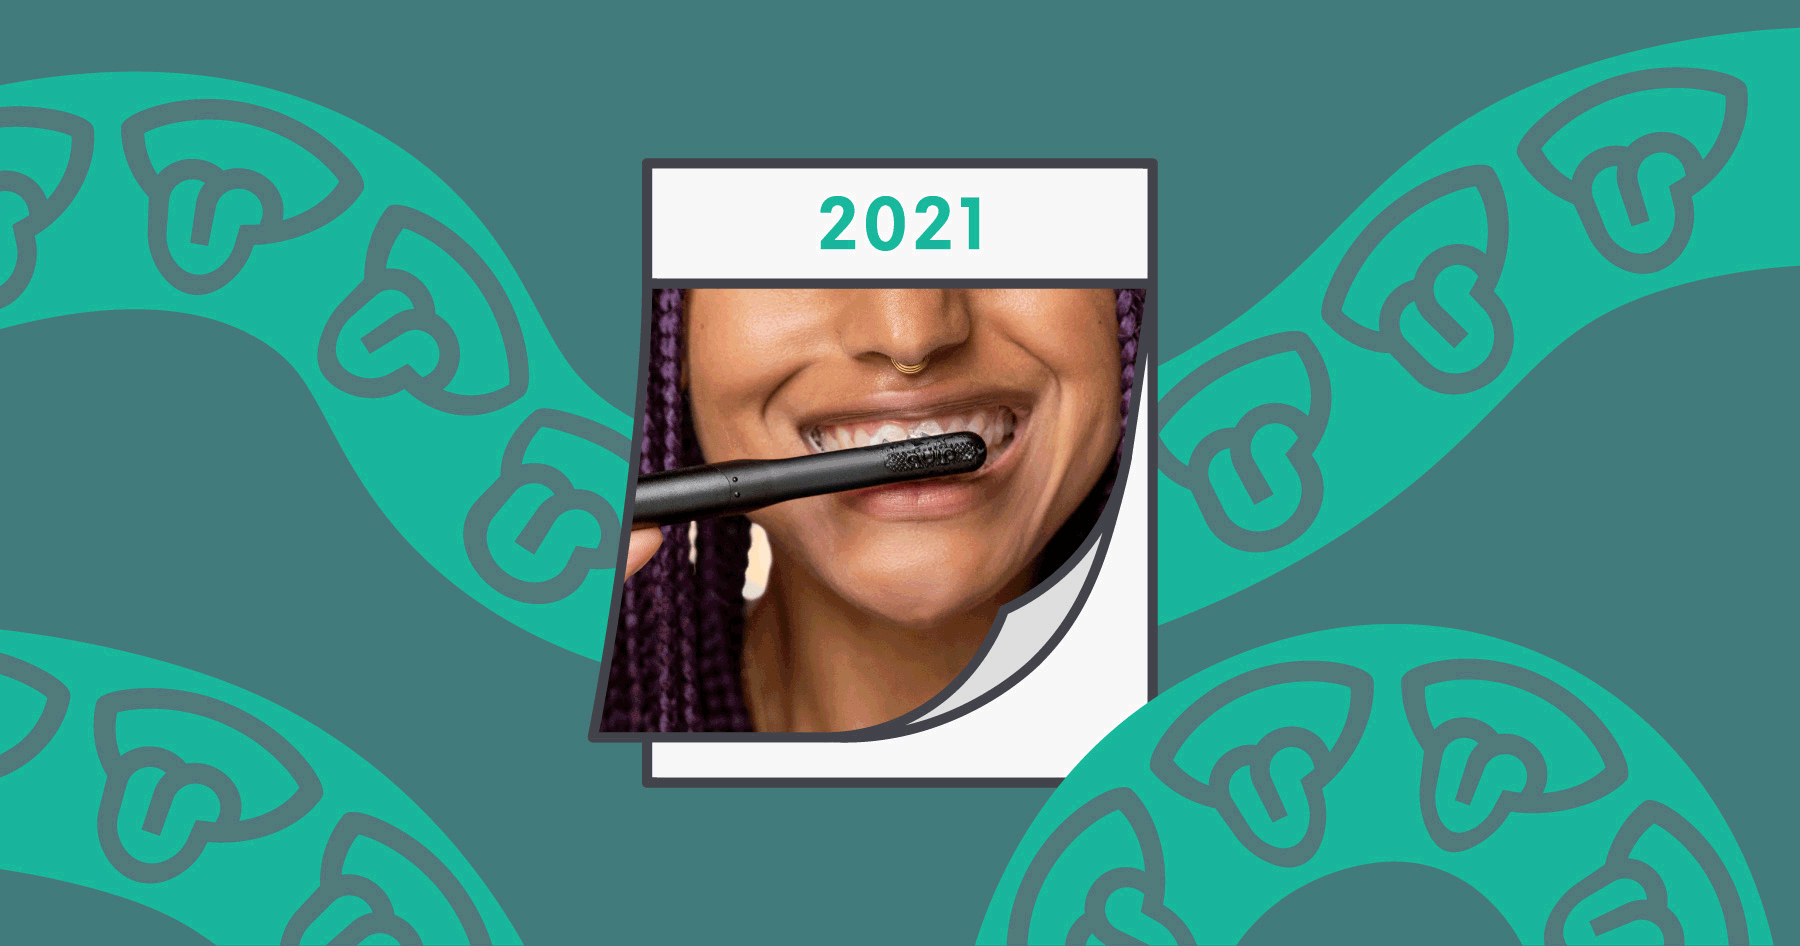 Counted and Recounted: Greater Oral Care Across 2021